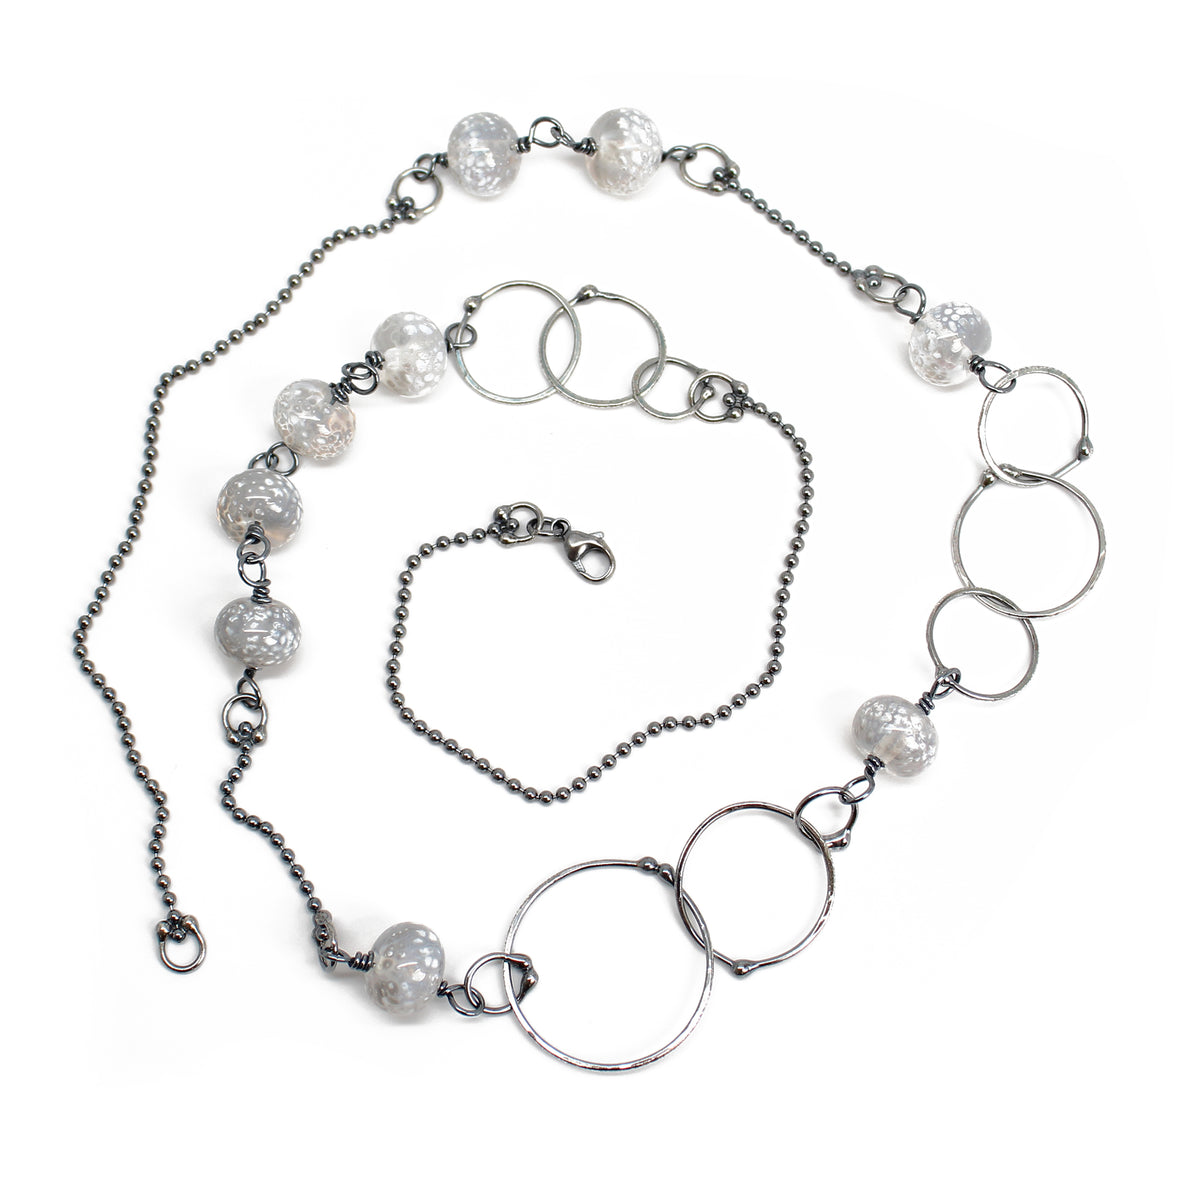 Handmade Sterling Silver Chain Necklace with White Lampwork Beads, 29.5 Inches